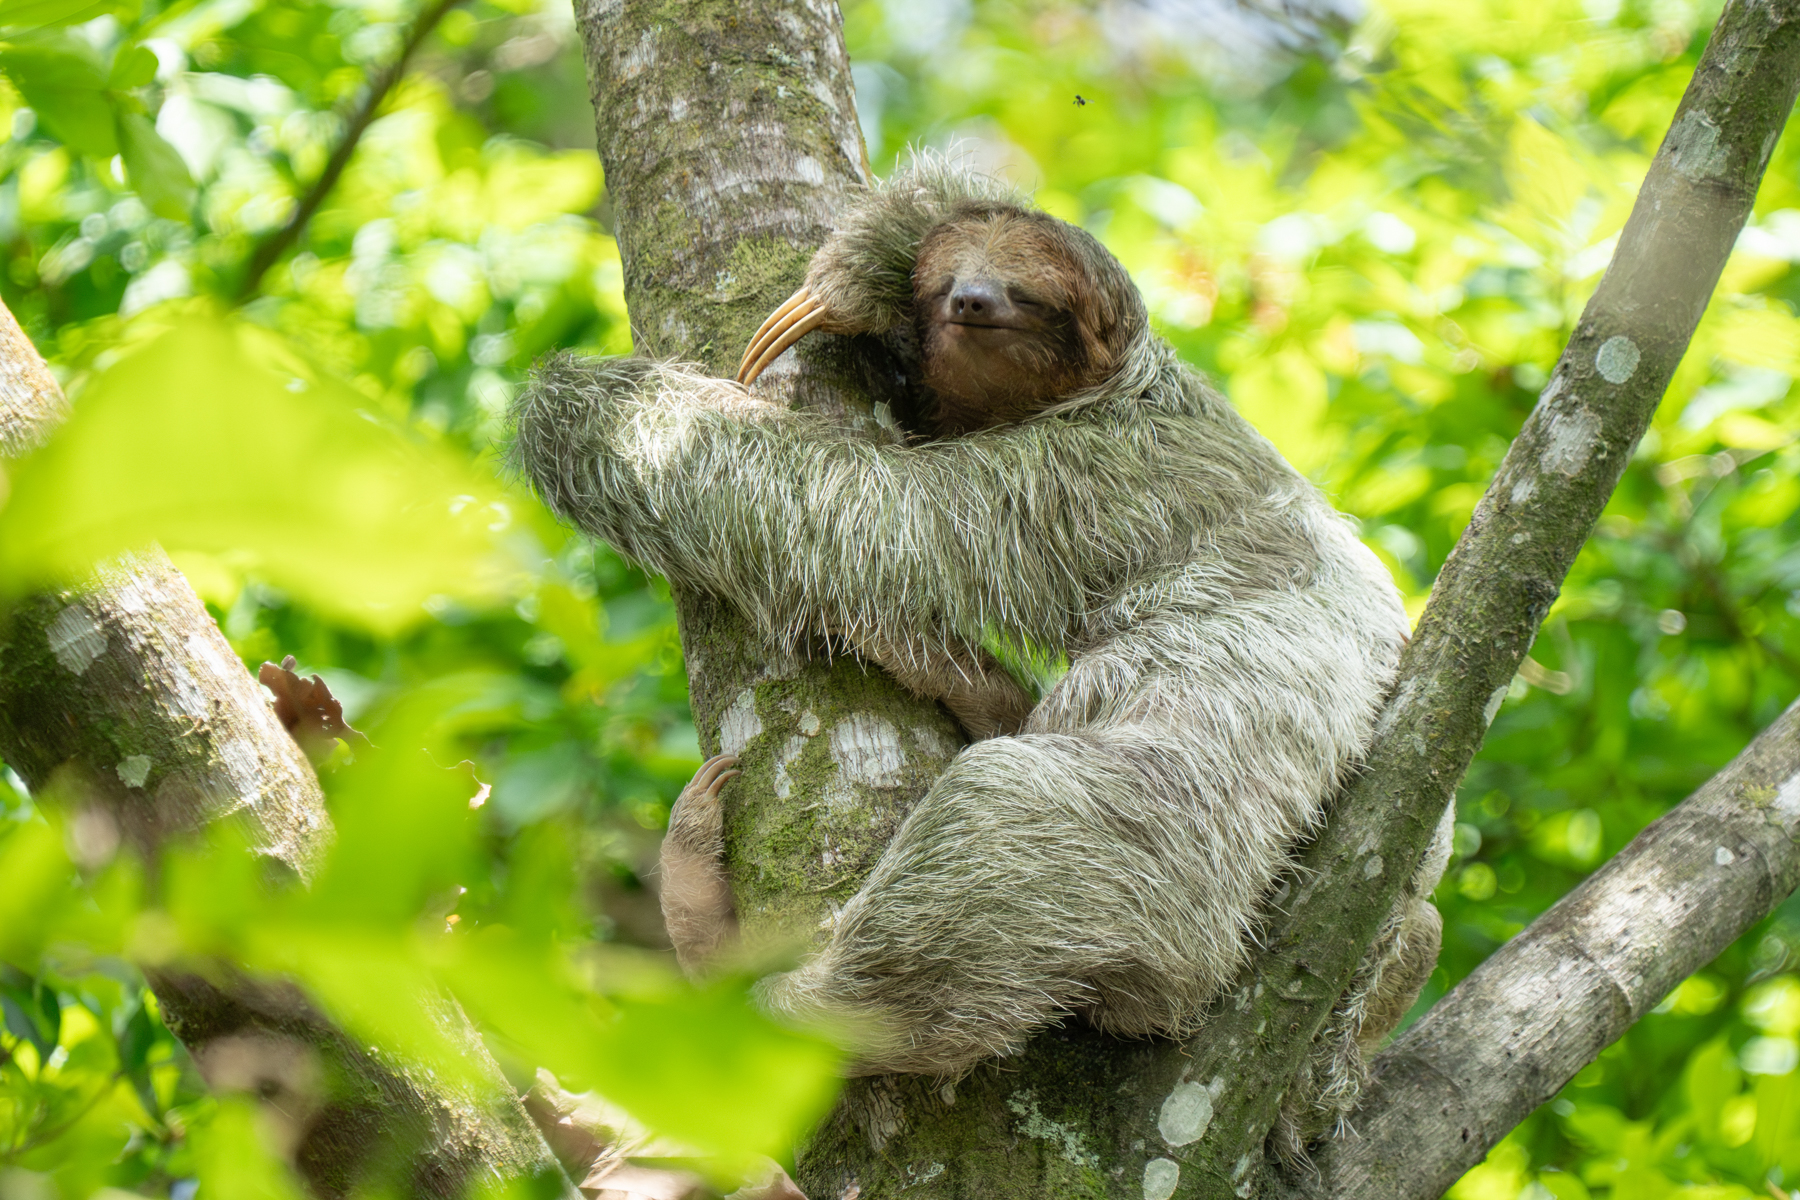 Brown-throated Sloth doing what sloths love best (image by Inger Vandyke)